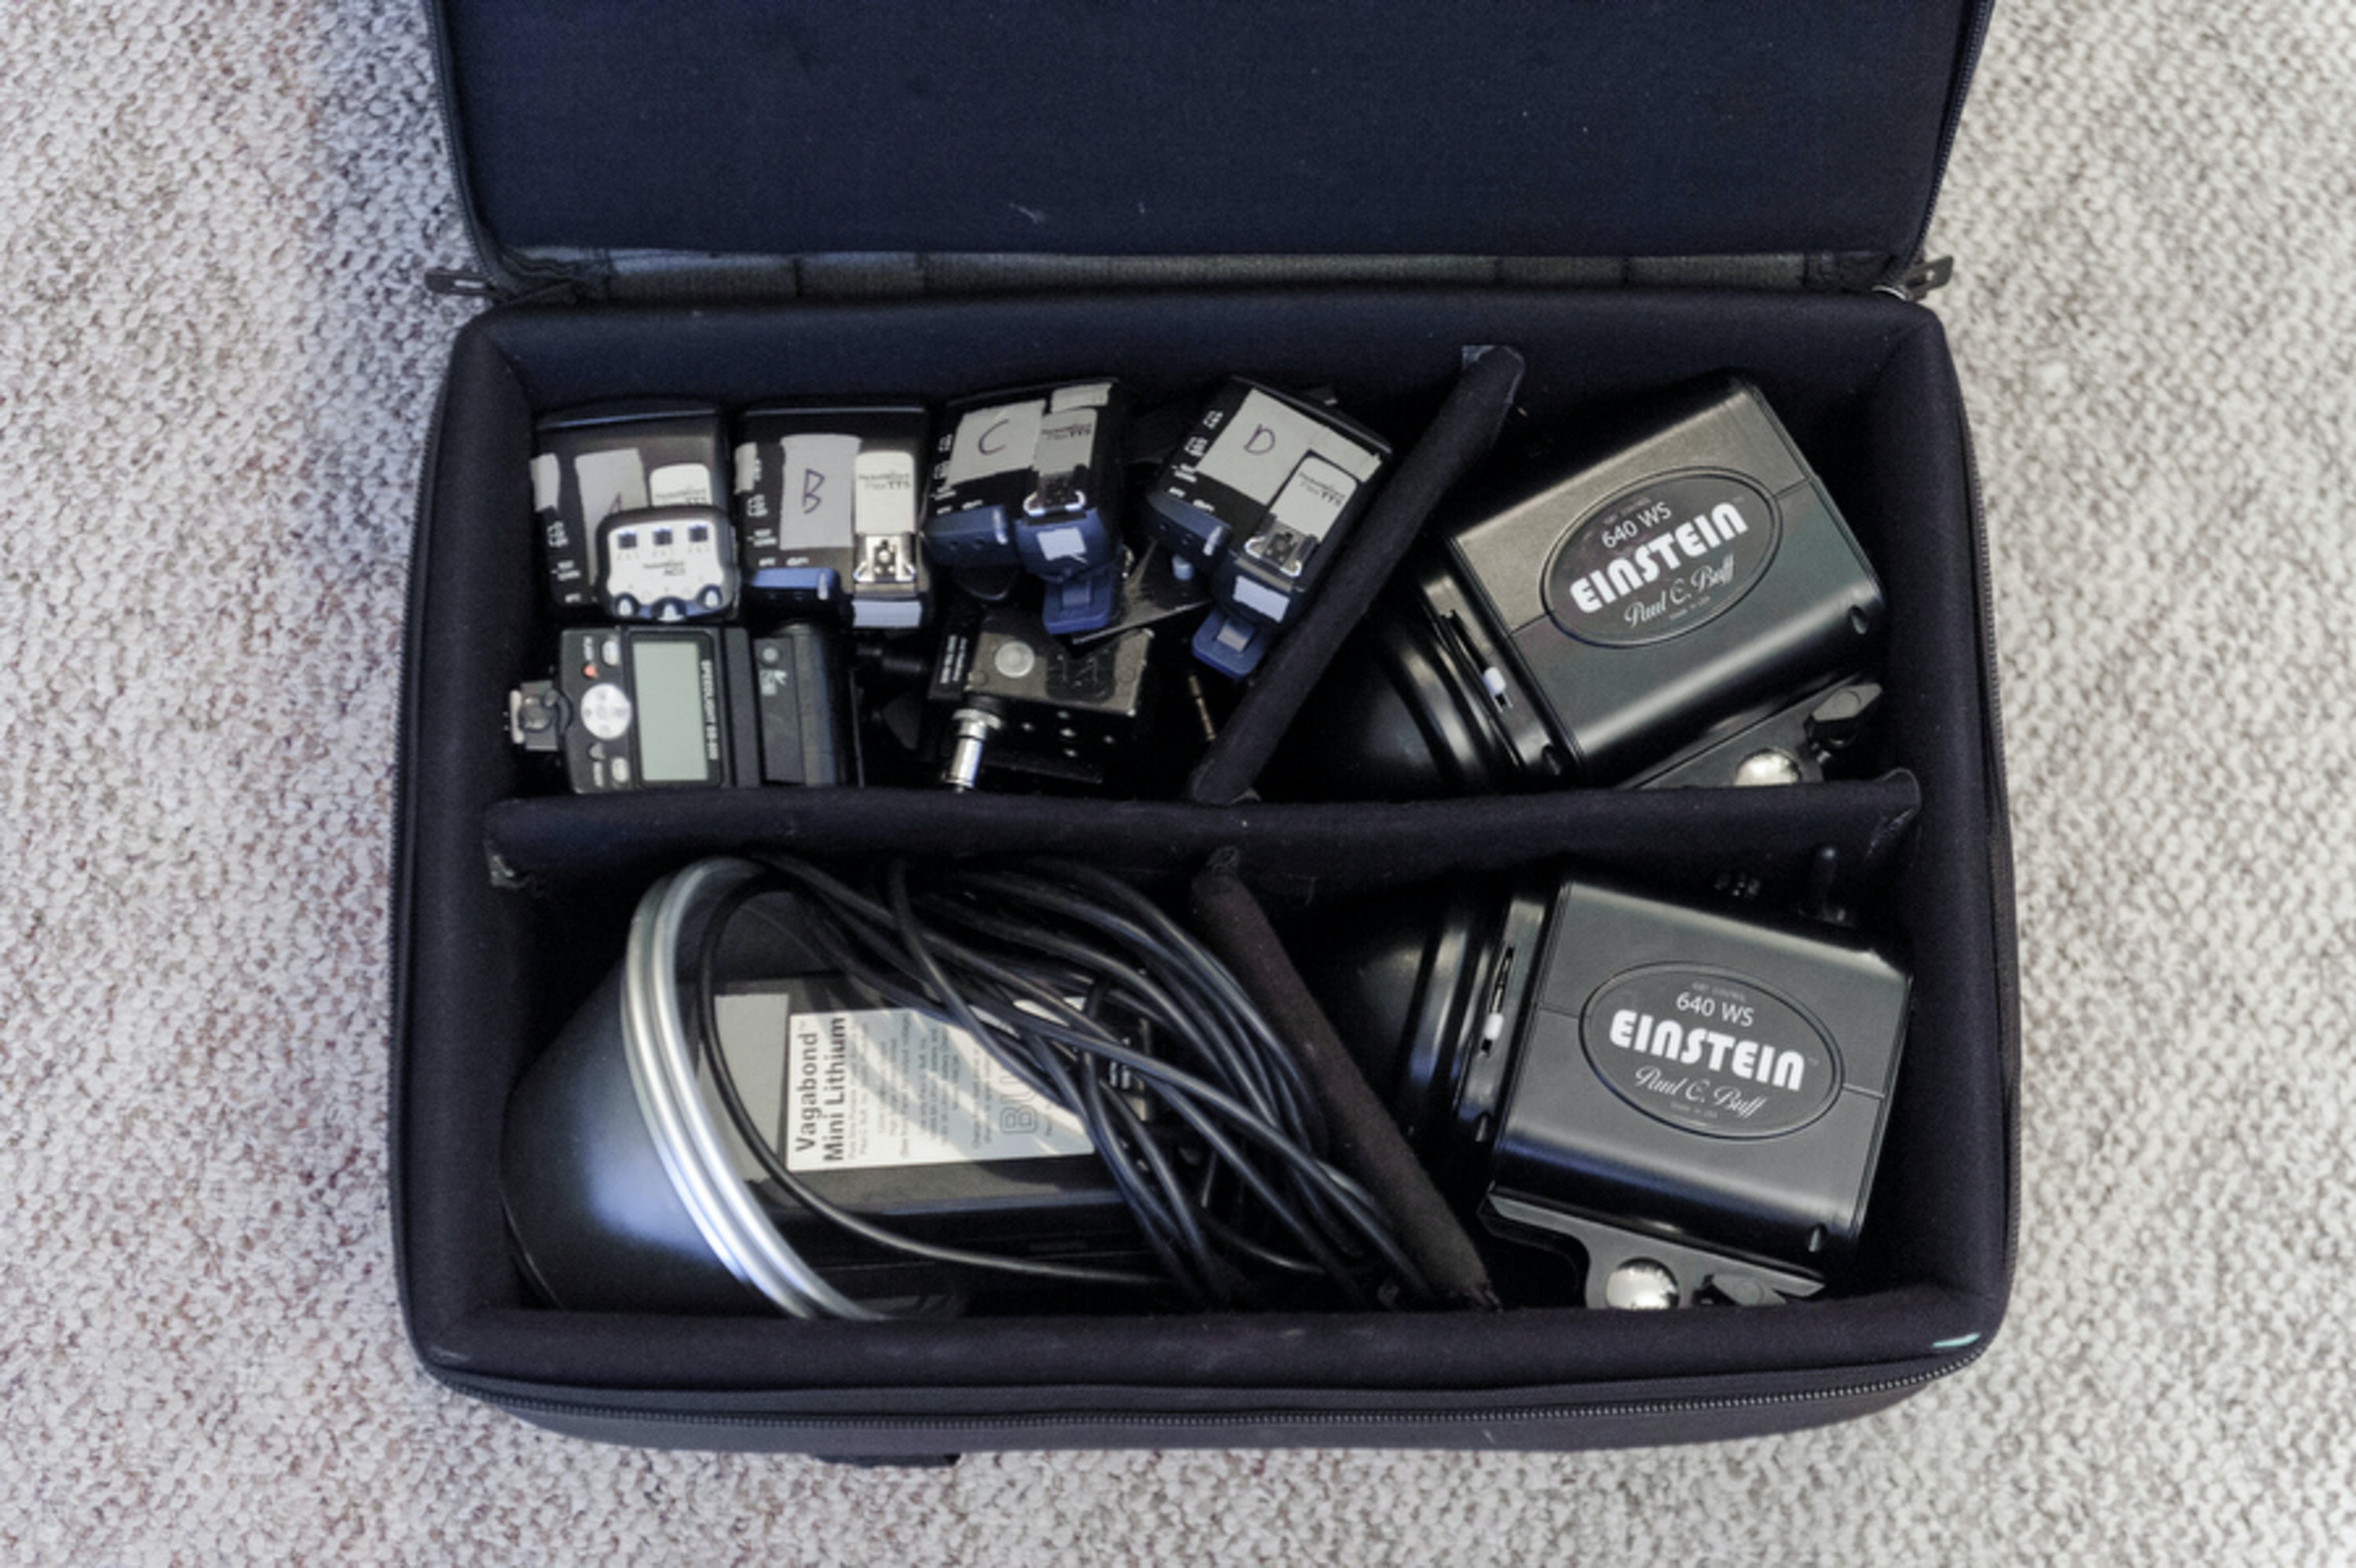 Lighting gear packed in a road case